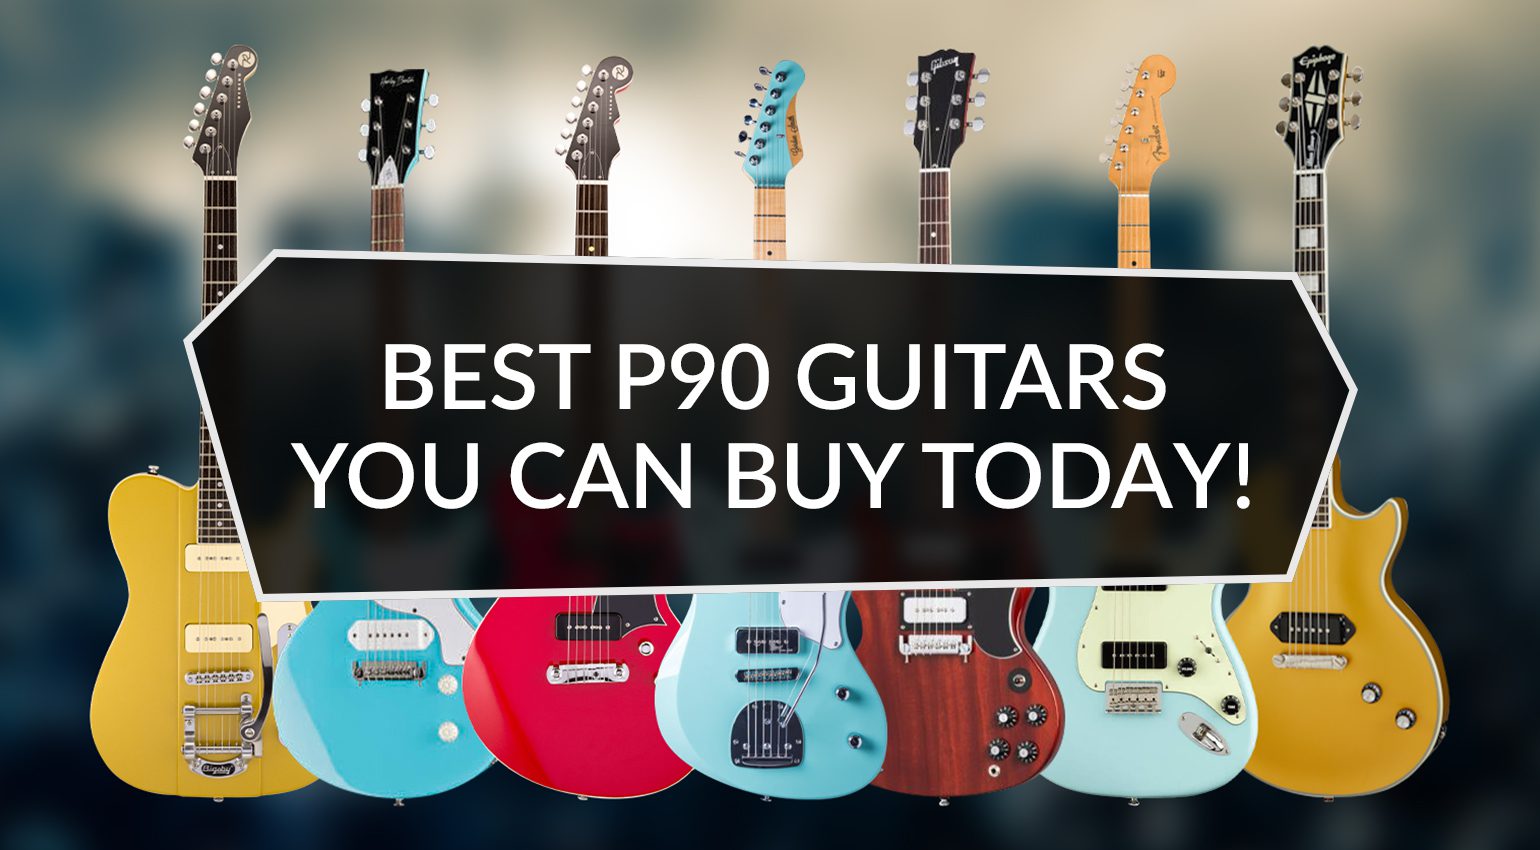 Best P-90-loaded guitars you can buy today! - gearnews.com